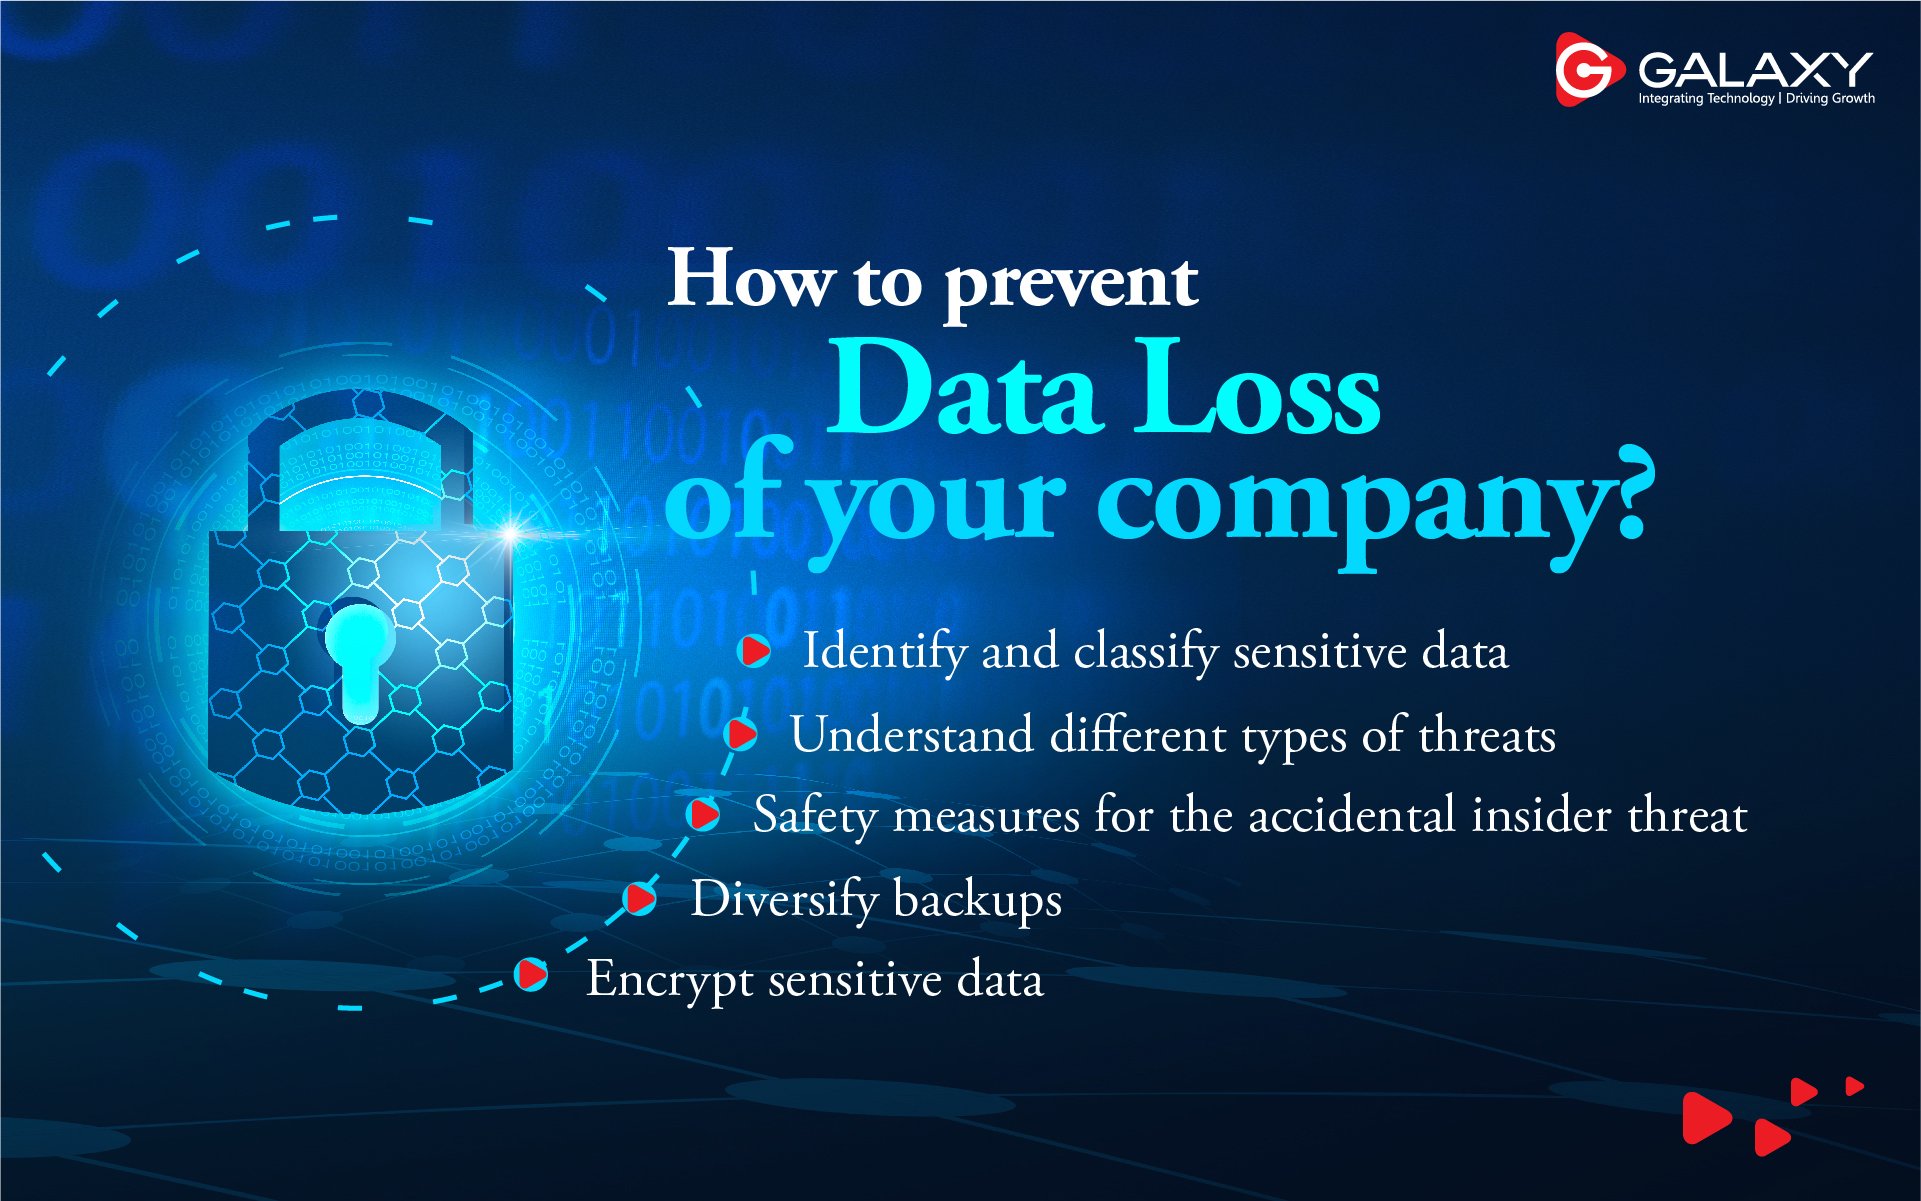 How To Prevent Data Loss Of Your Company?